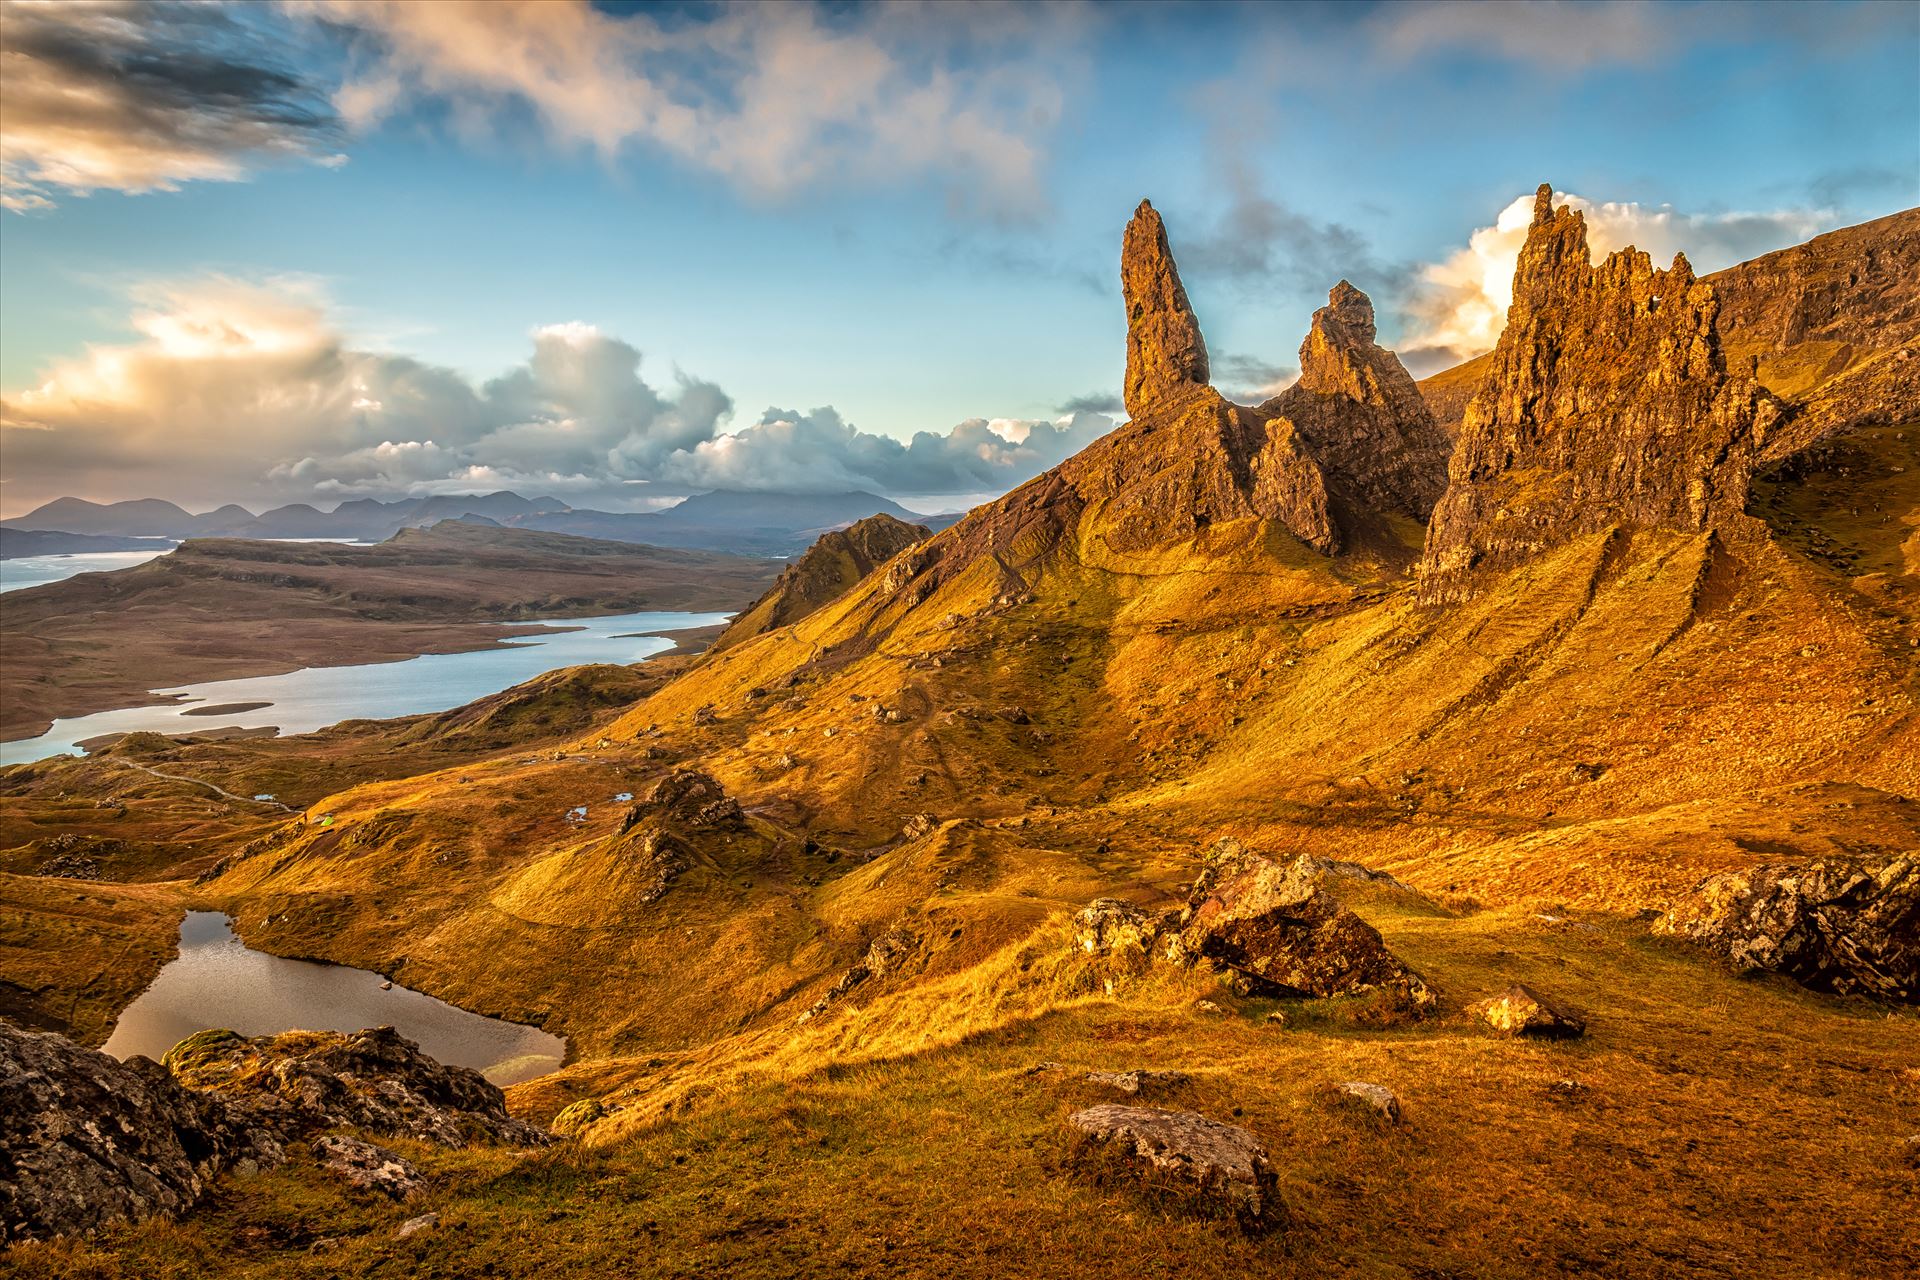 The Old Man of Storr - The Storr is a rocky hill on the Trotternish peninsula of the Isle of Skye in Scotland. The hill presents a steep rocky eastern face overlooking the Sound of Raasay, contrasting with gentler grassy slopes to the west. by philreay